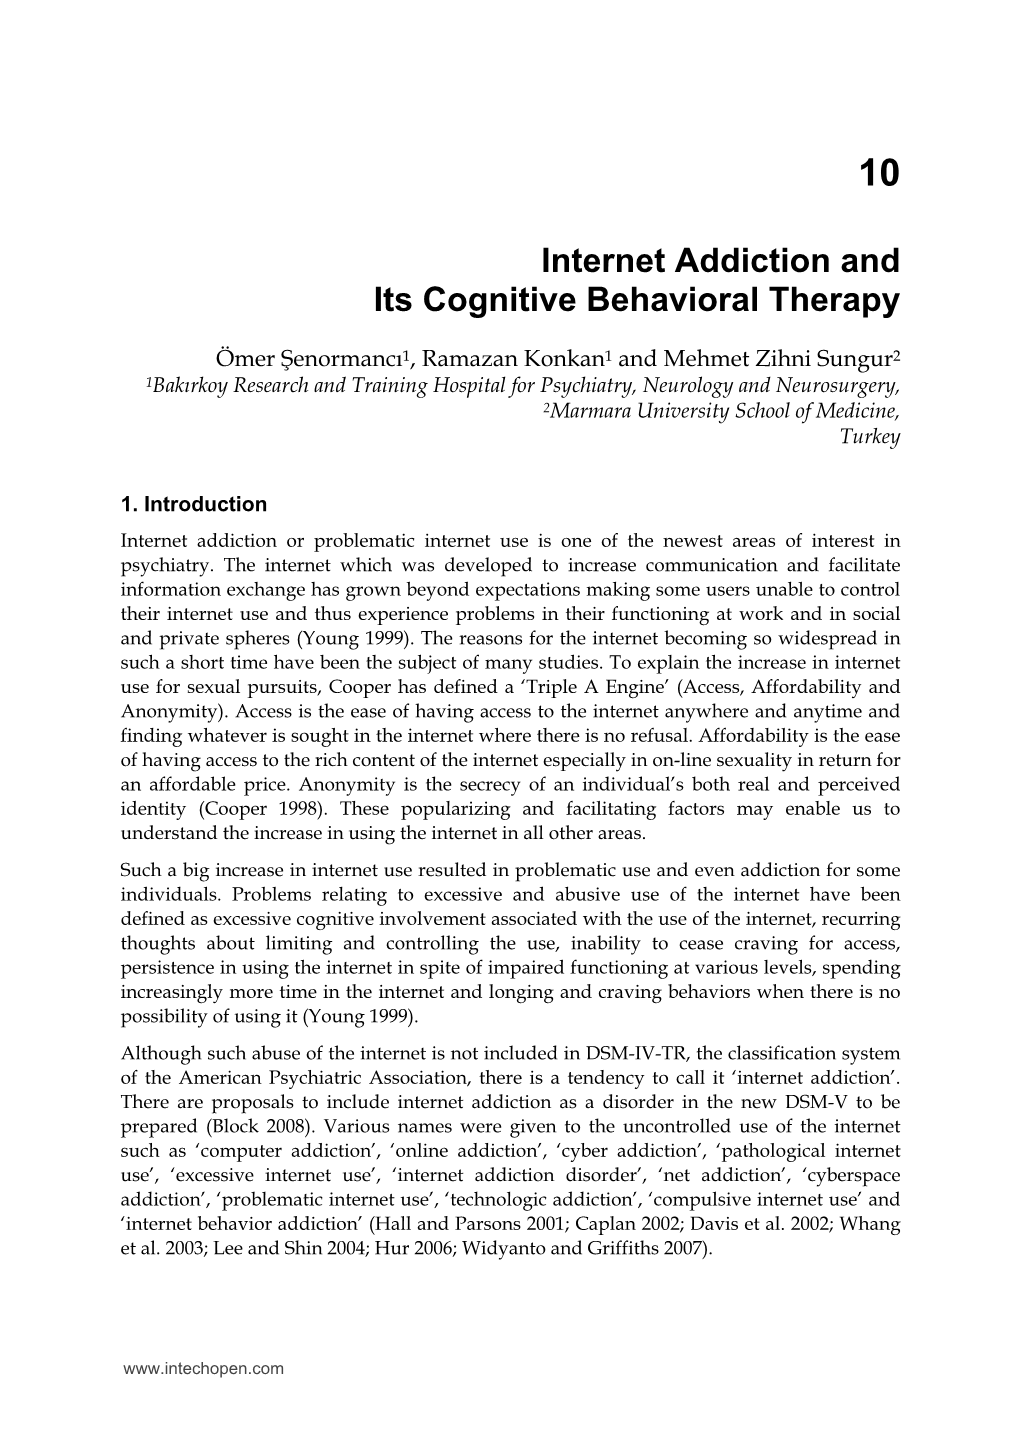 Internet Addiction and Its Cognitive Behavioral Therapy